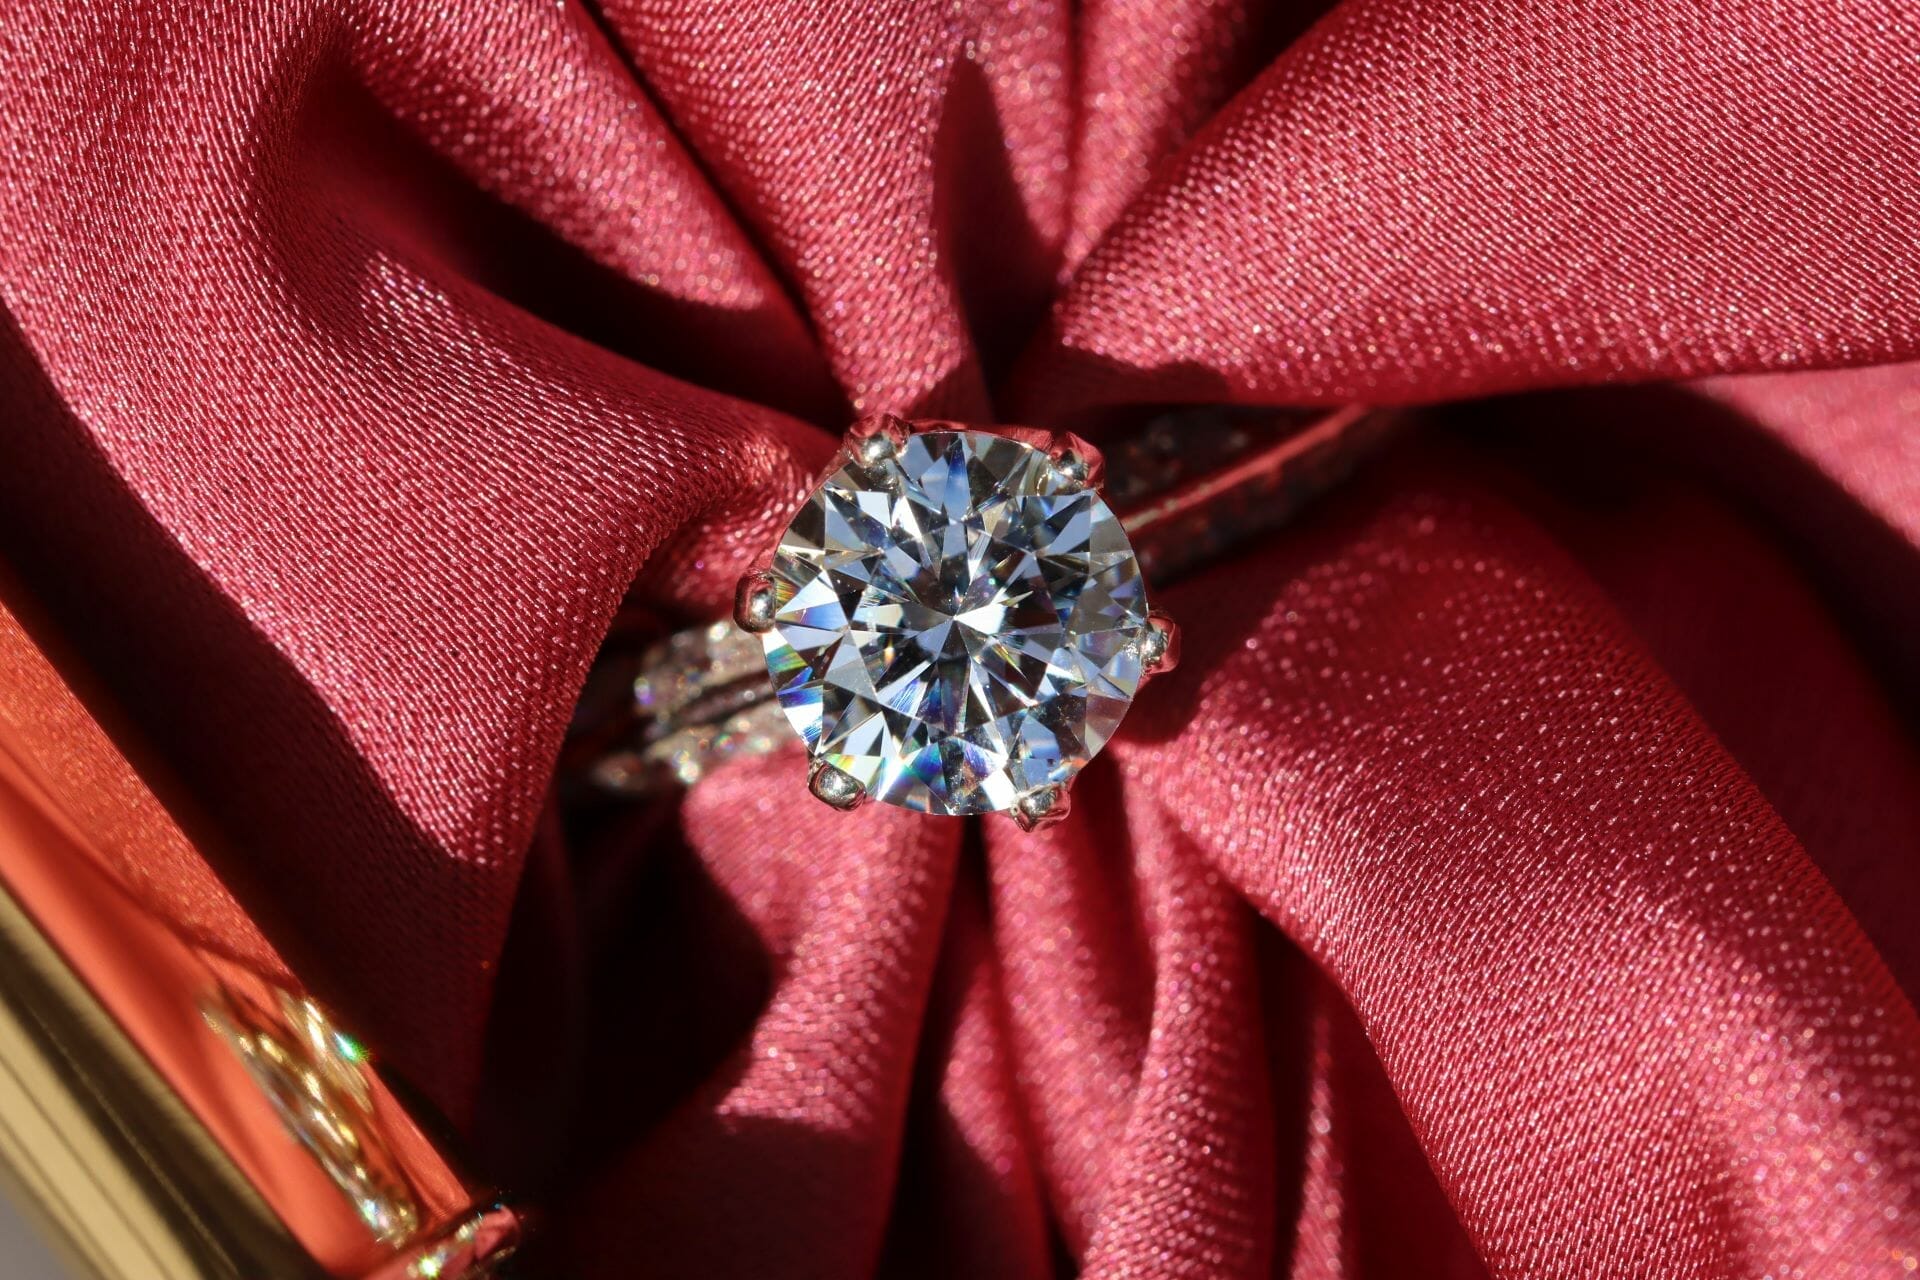 A beautiful conflict-free diamond ring wrapped in a red cloth.